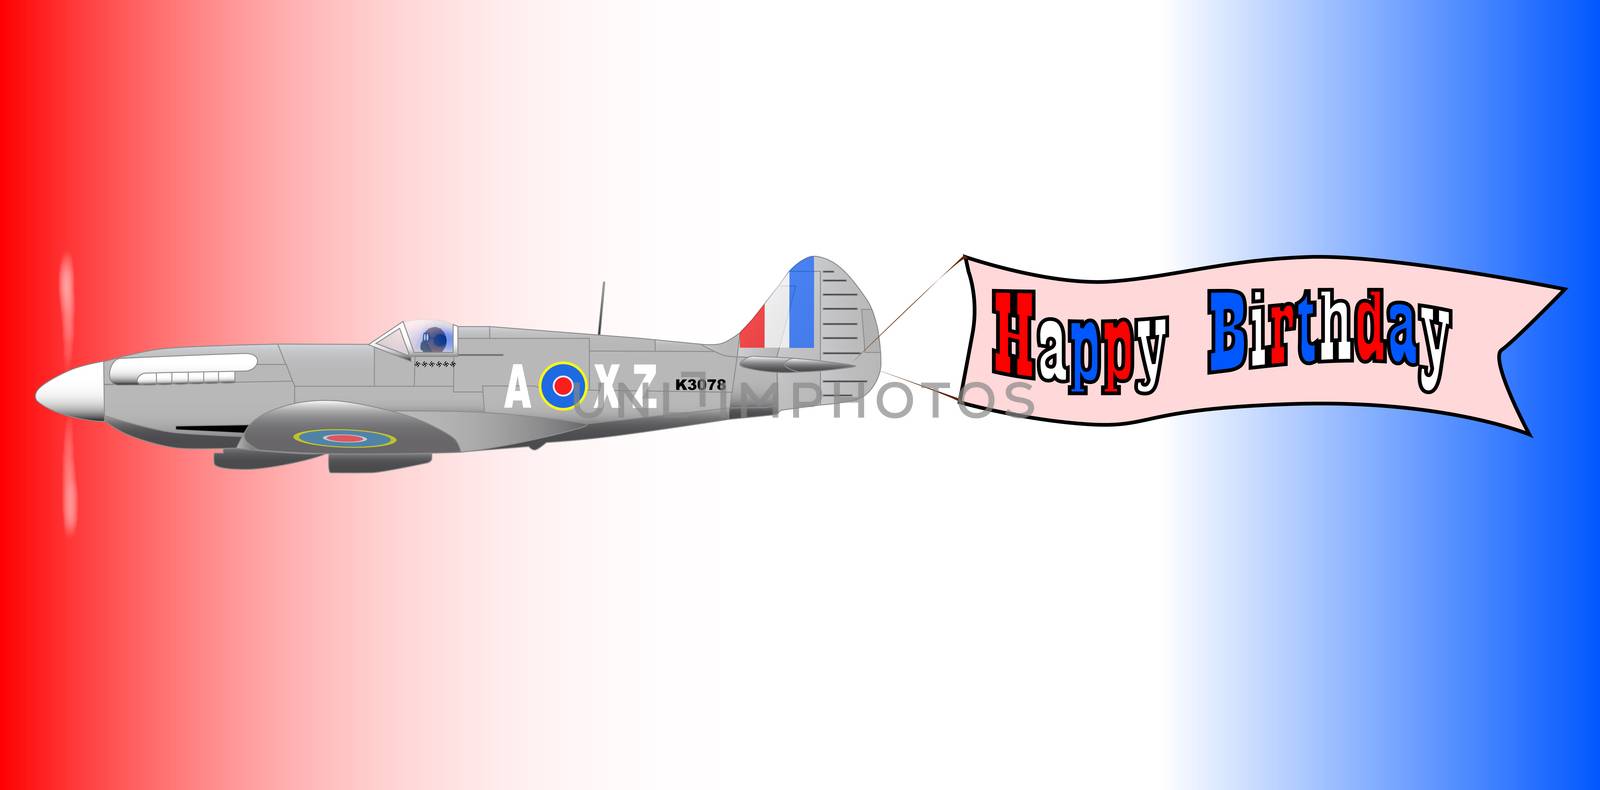 A World War 2 fighter plane towing a 'Happy Birthday' banner.